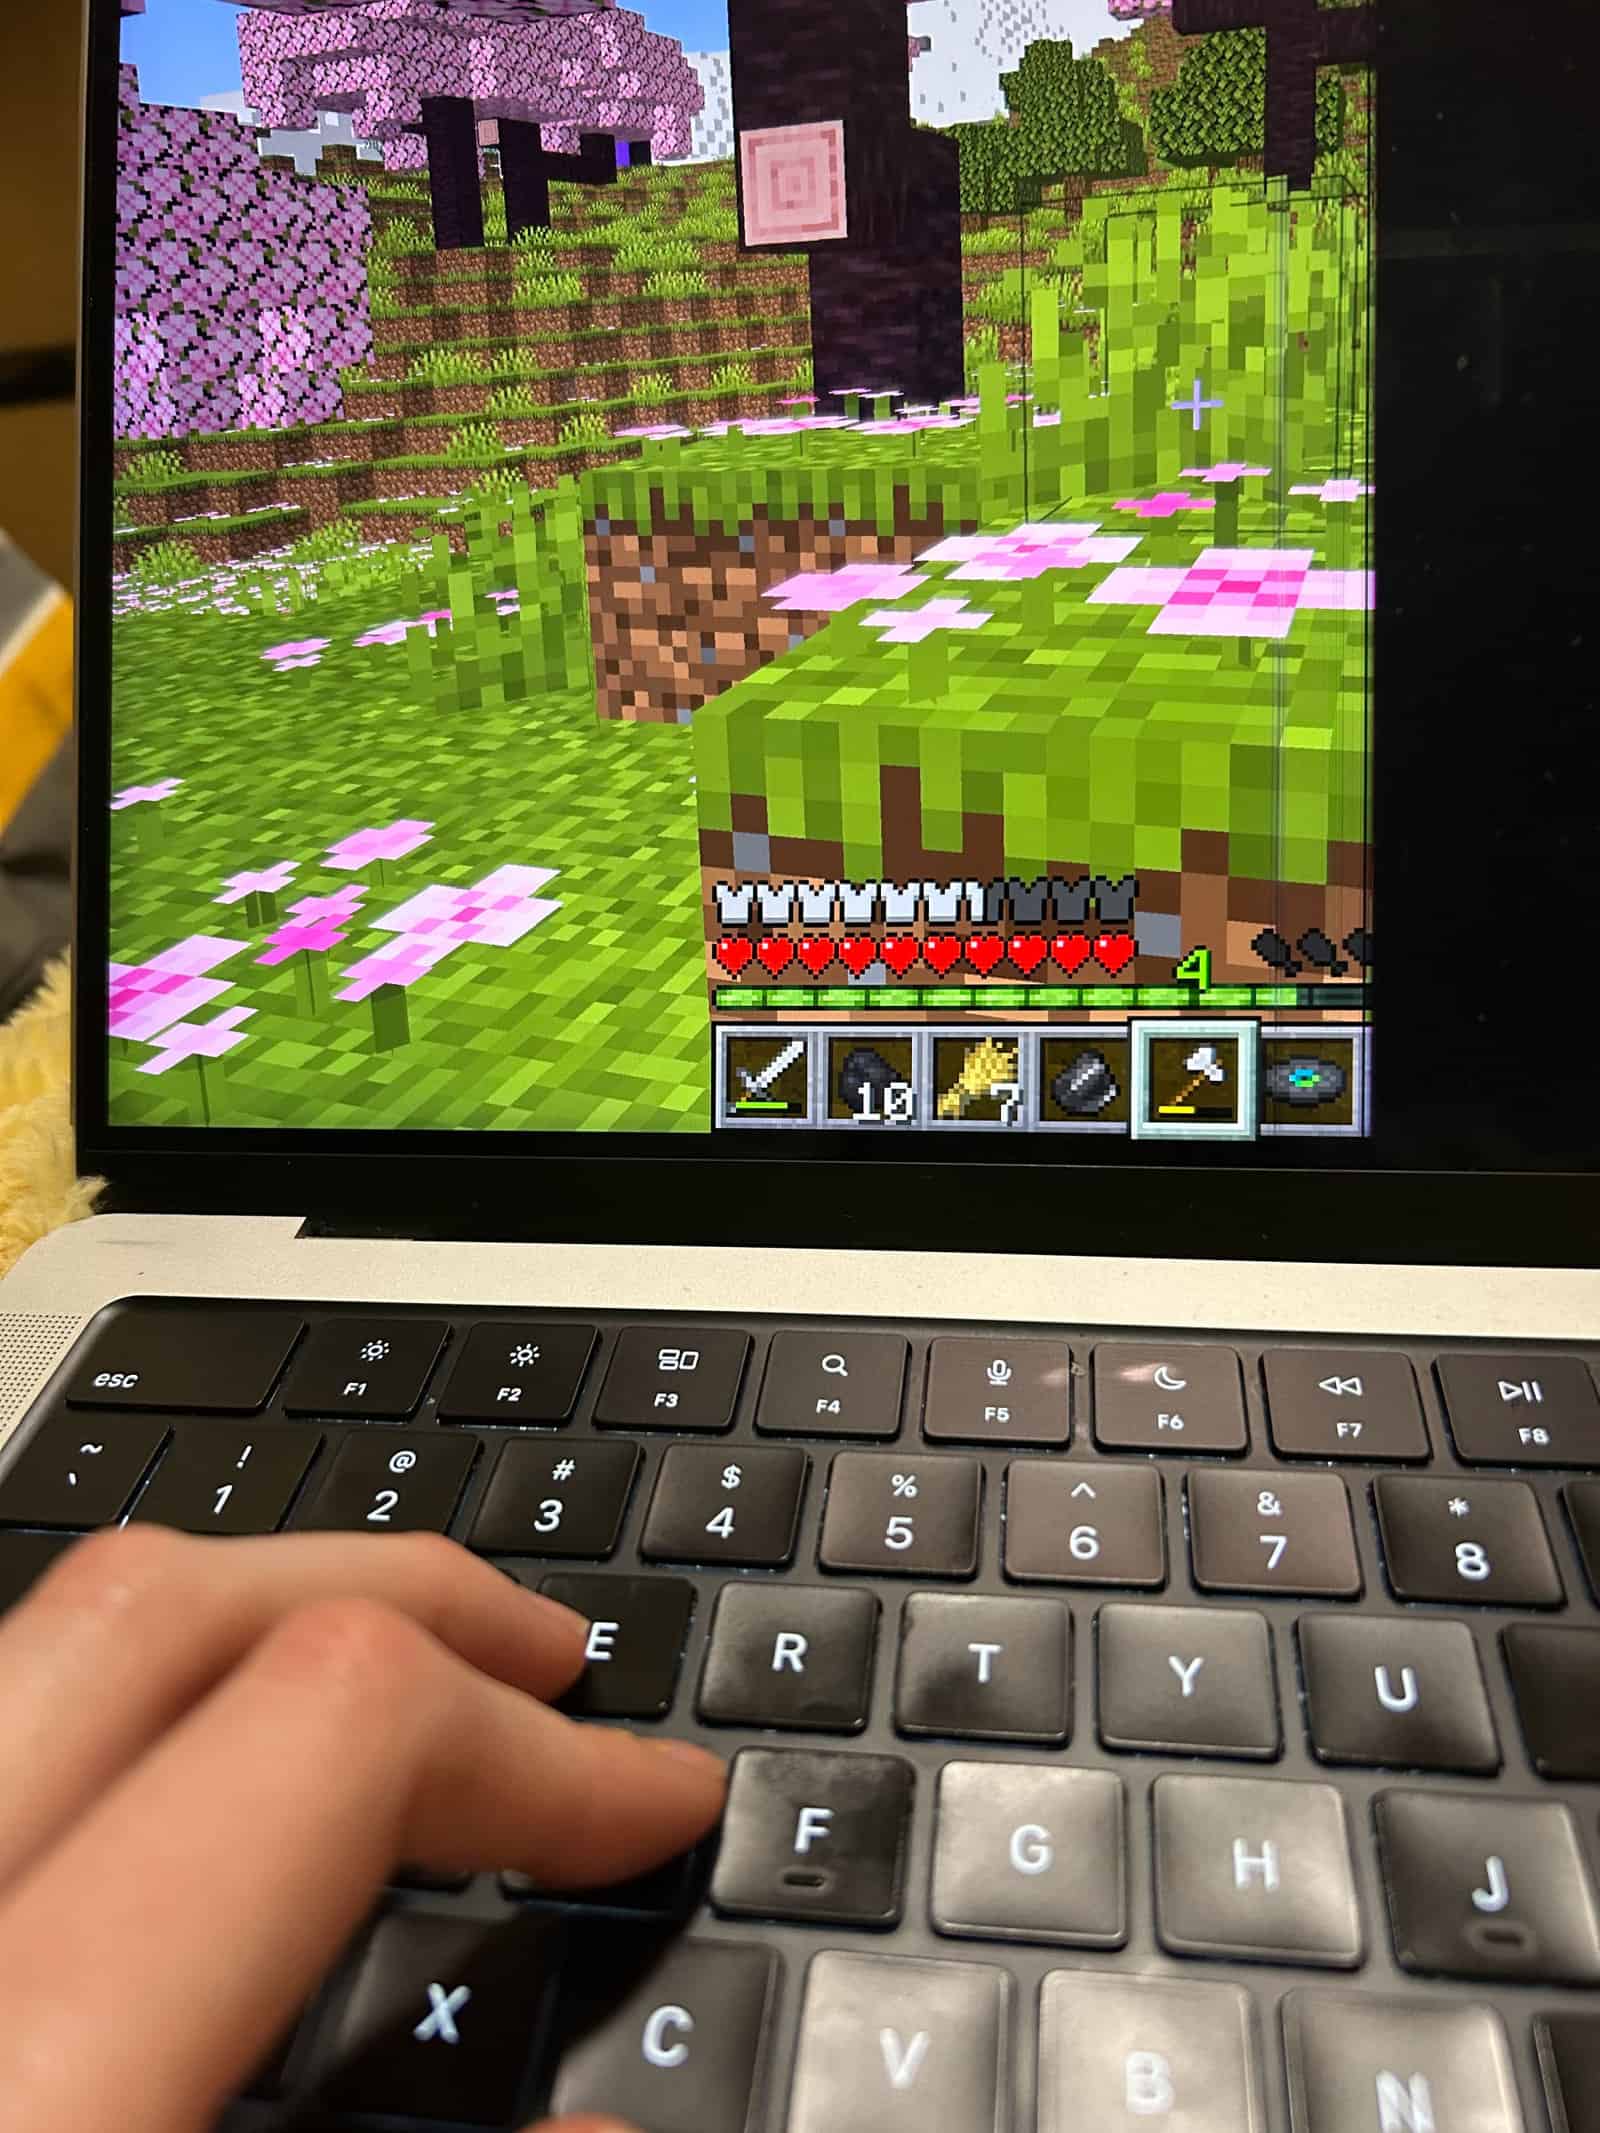 6 Life Lessons From Minecraft. Today's kids love this game, and I'm…, by  Nick Such